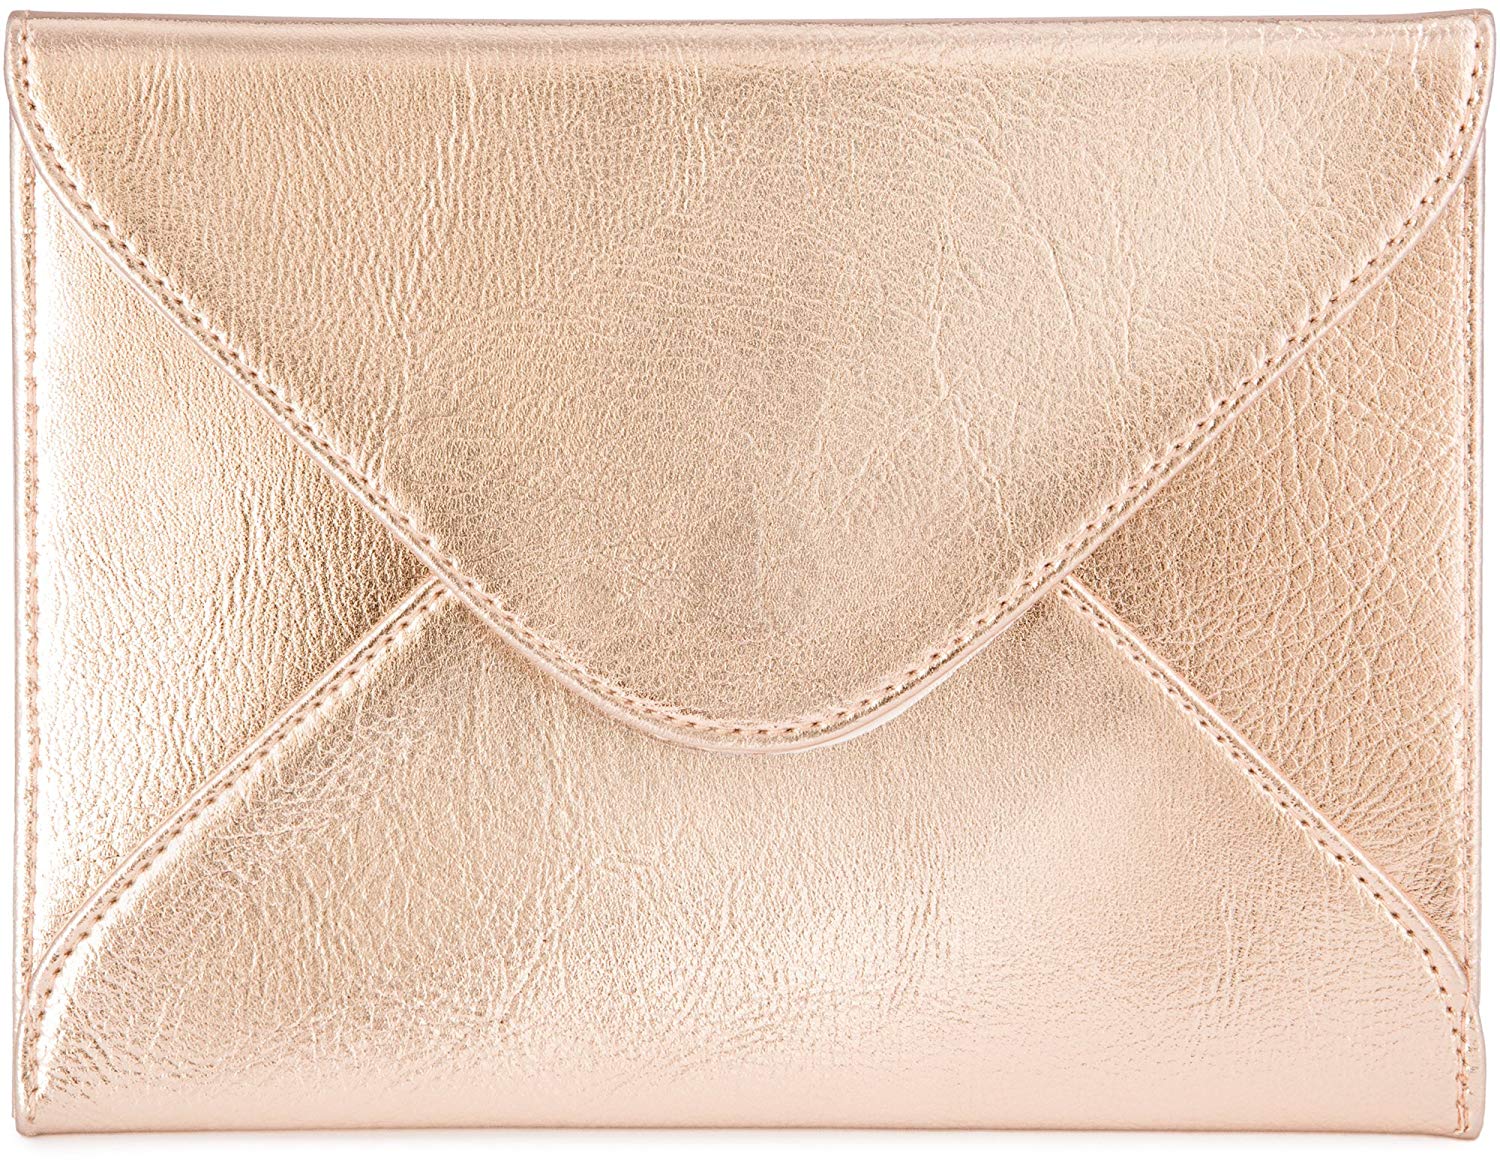 JUVITUS Small Envelope Clutch Bag, 8 x 6 Inches, Metallic Rose Gold for Cosmetics, Makeup, Cellphone, and Wallet - Made of Premium Vegan Leather (SEV8)